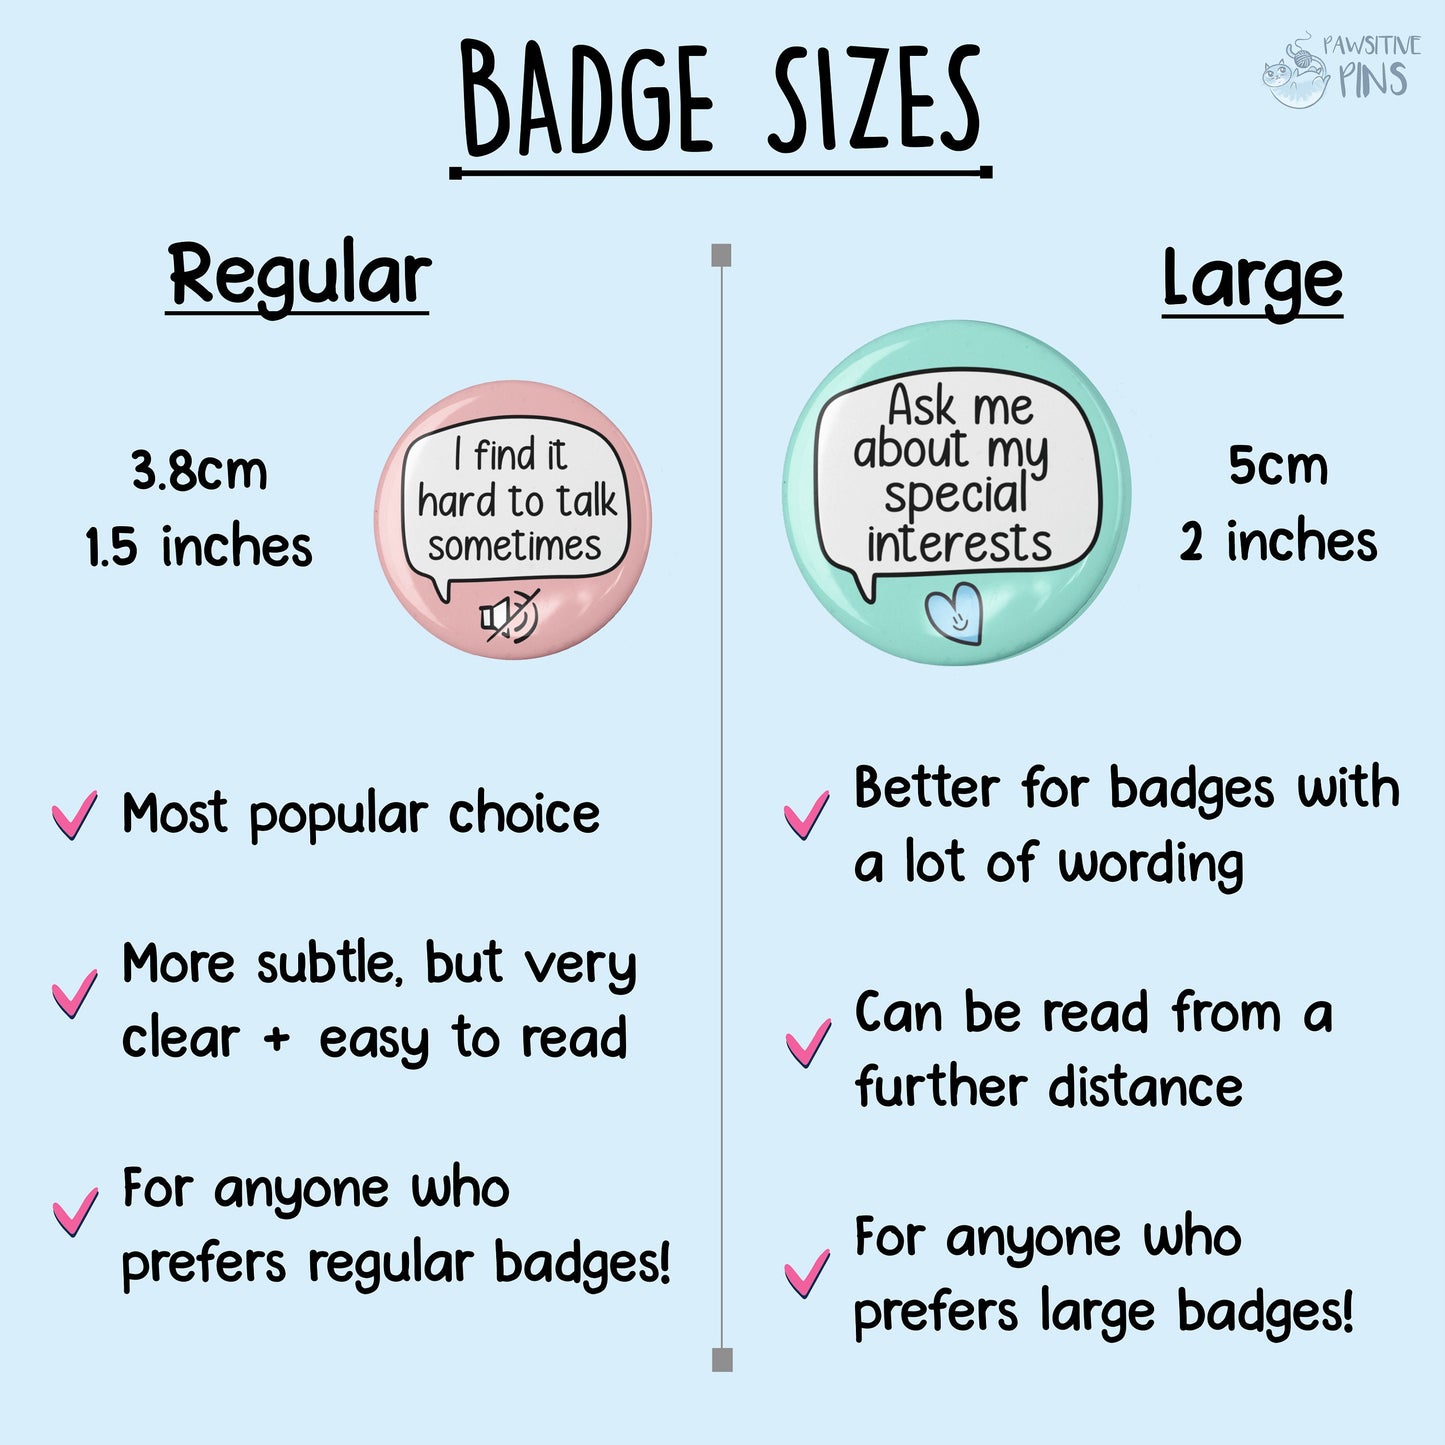 I Walk Slowly Please Be Patient! - Badge Pin | Hidden Disability - Invisible Illness